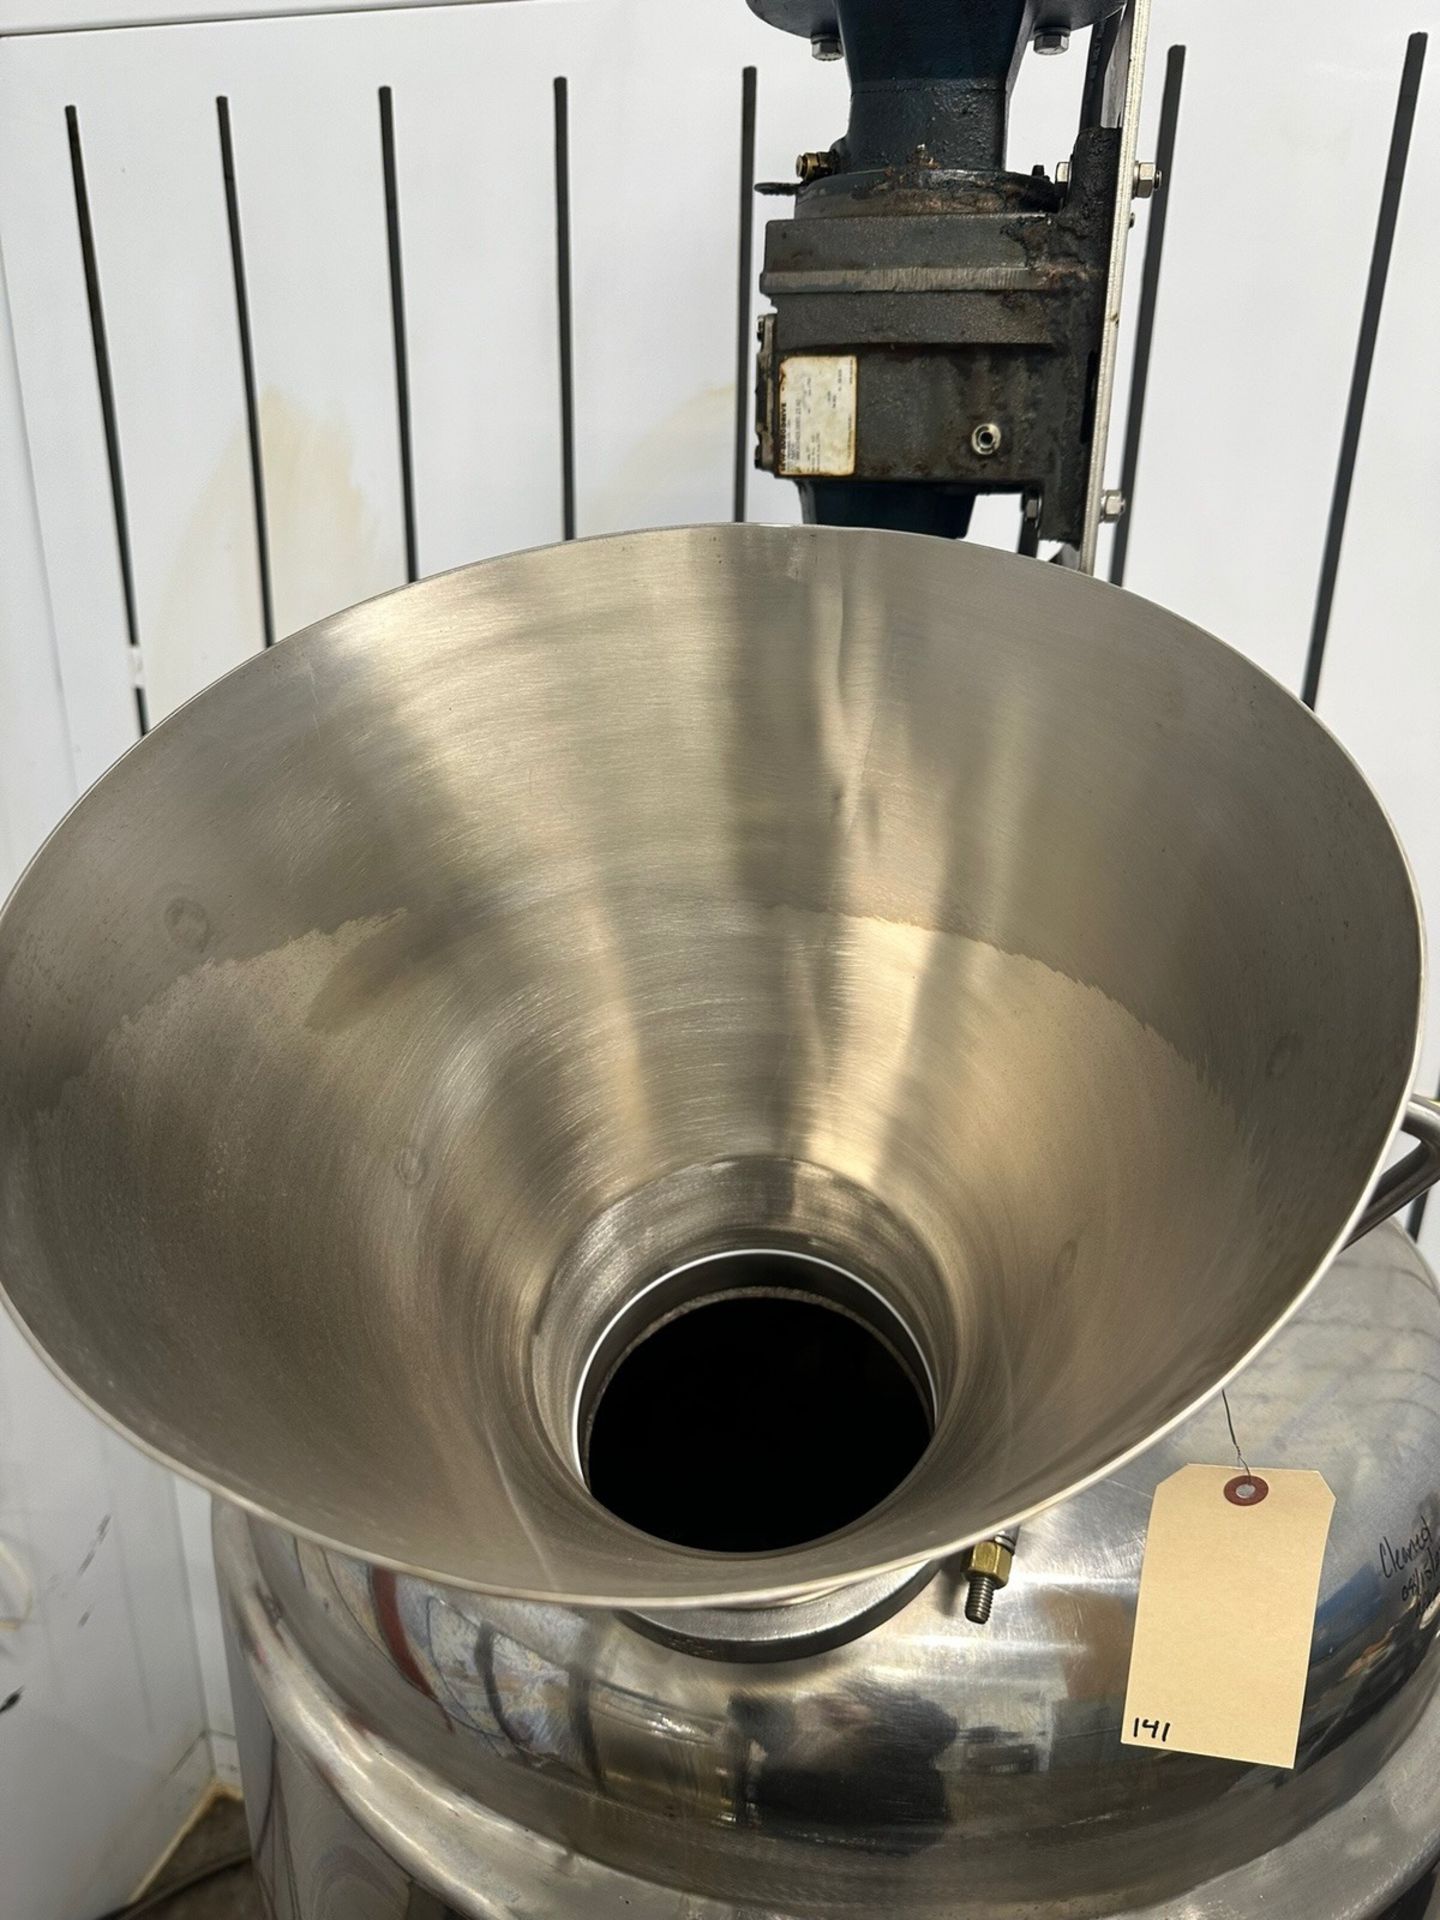 Stainless Steel Pressure Vessel With Agitation, Approx. 300L | Rig Fee $125 - Image 2 of 4